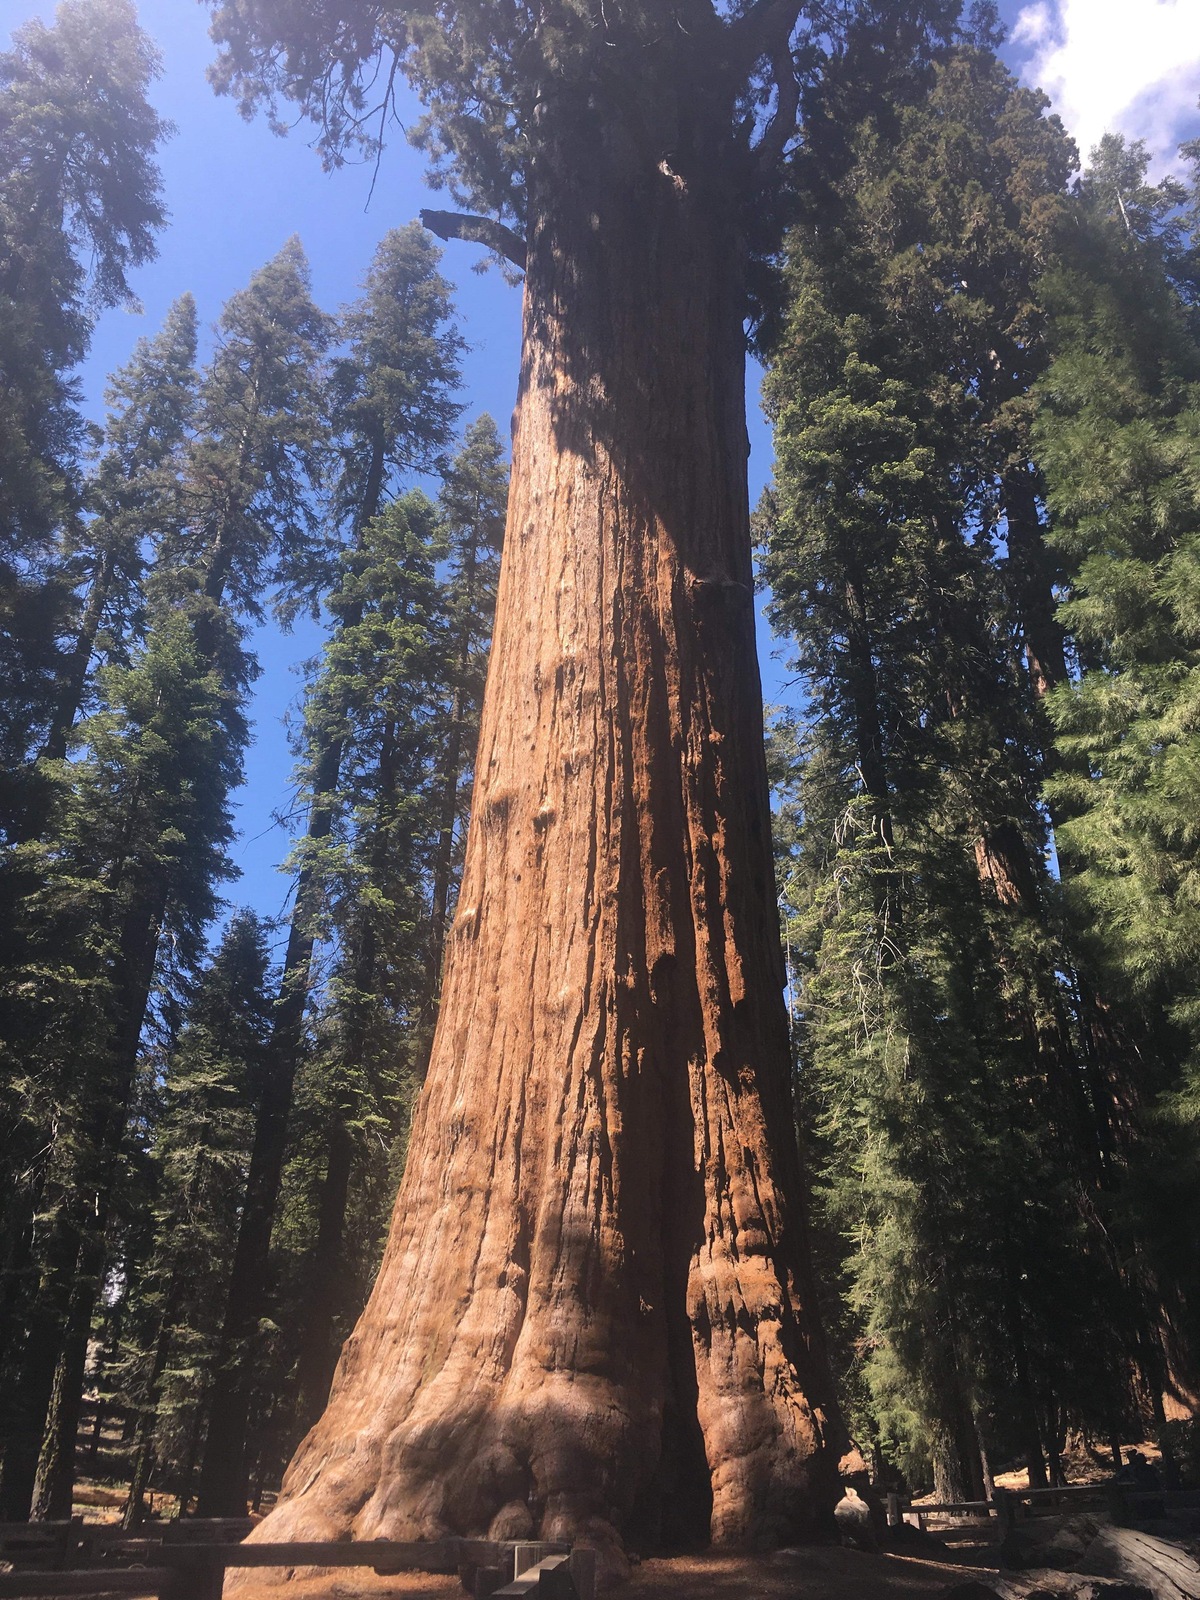 One of the largest sequoia trees in the world